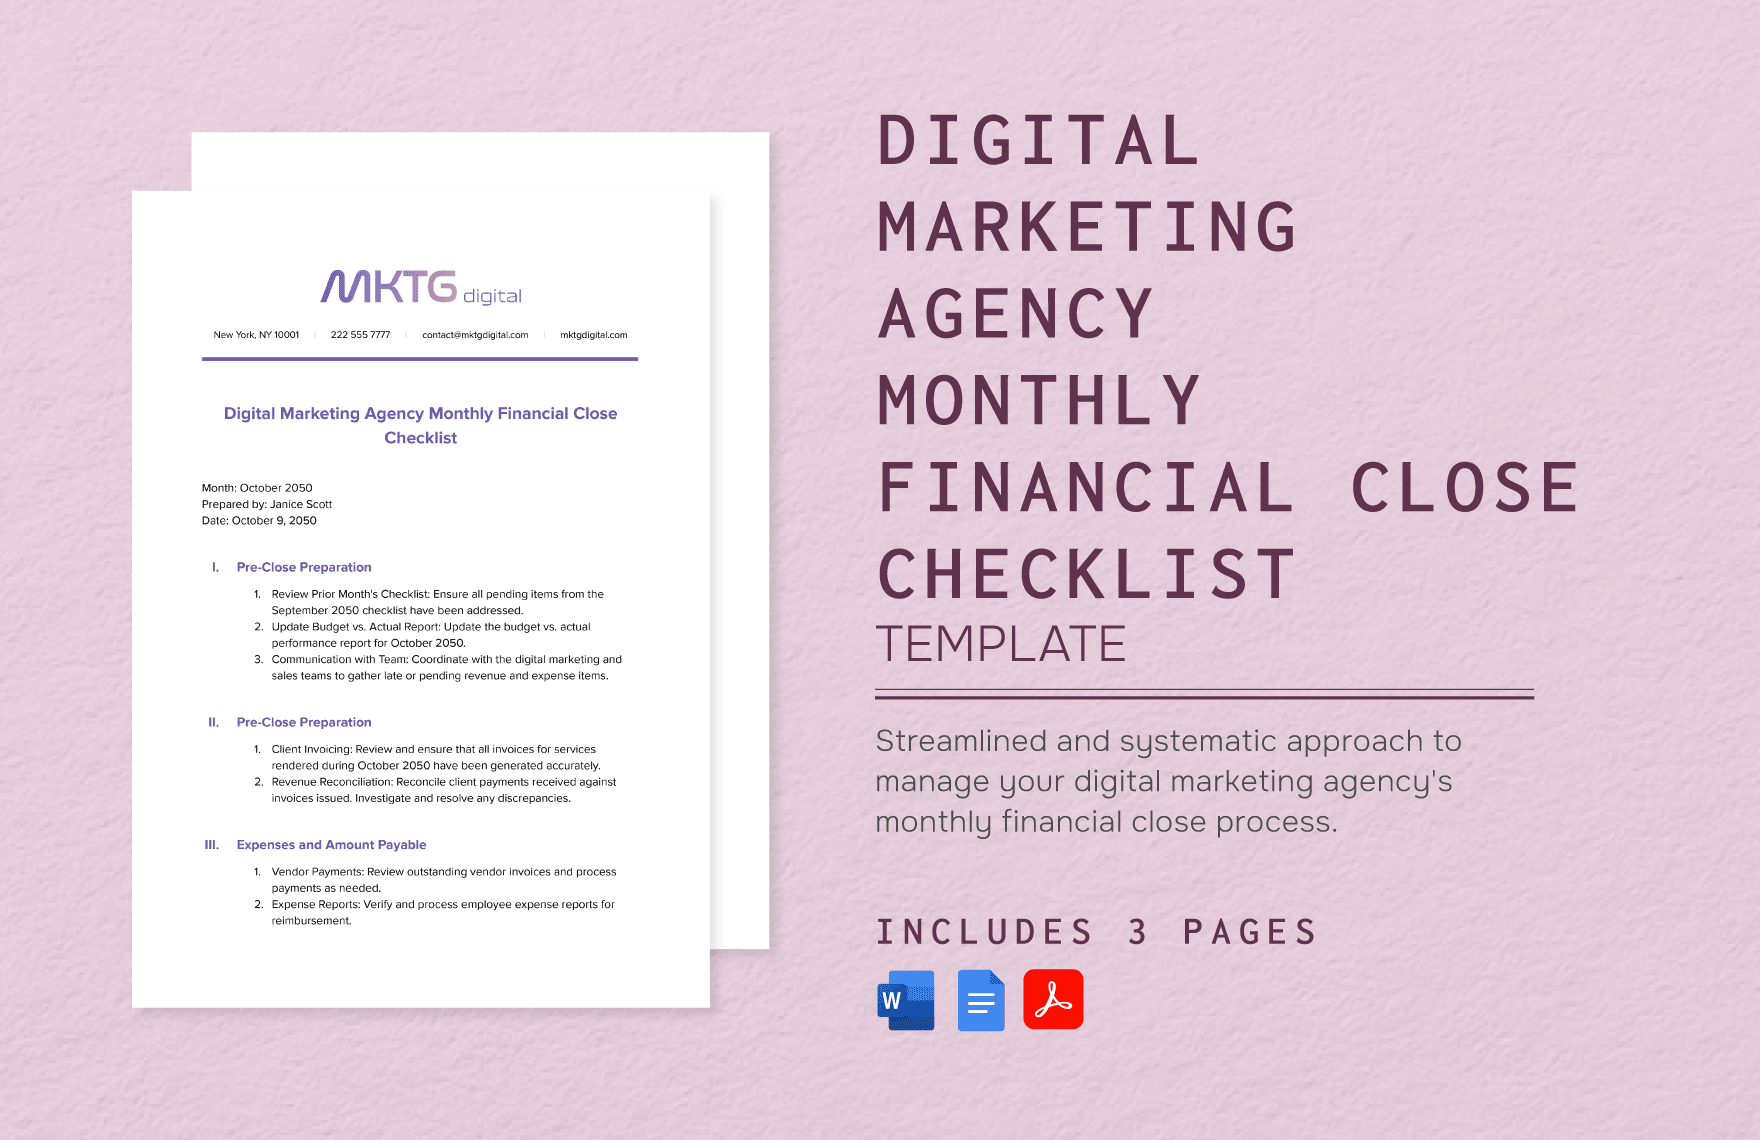 Digital Marketing Agency Monthly Financial Close Checklist Template in Word, Google Docs, PDF